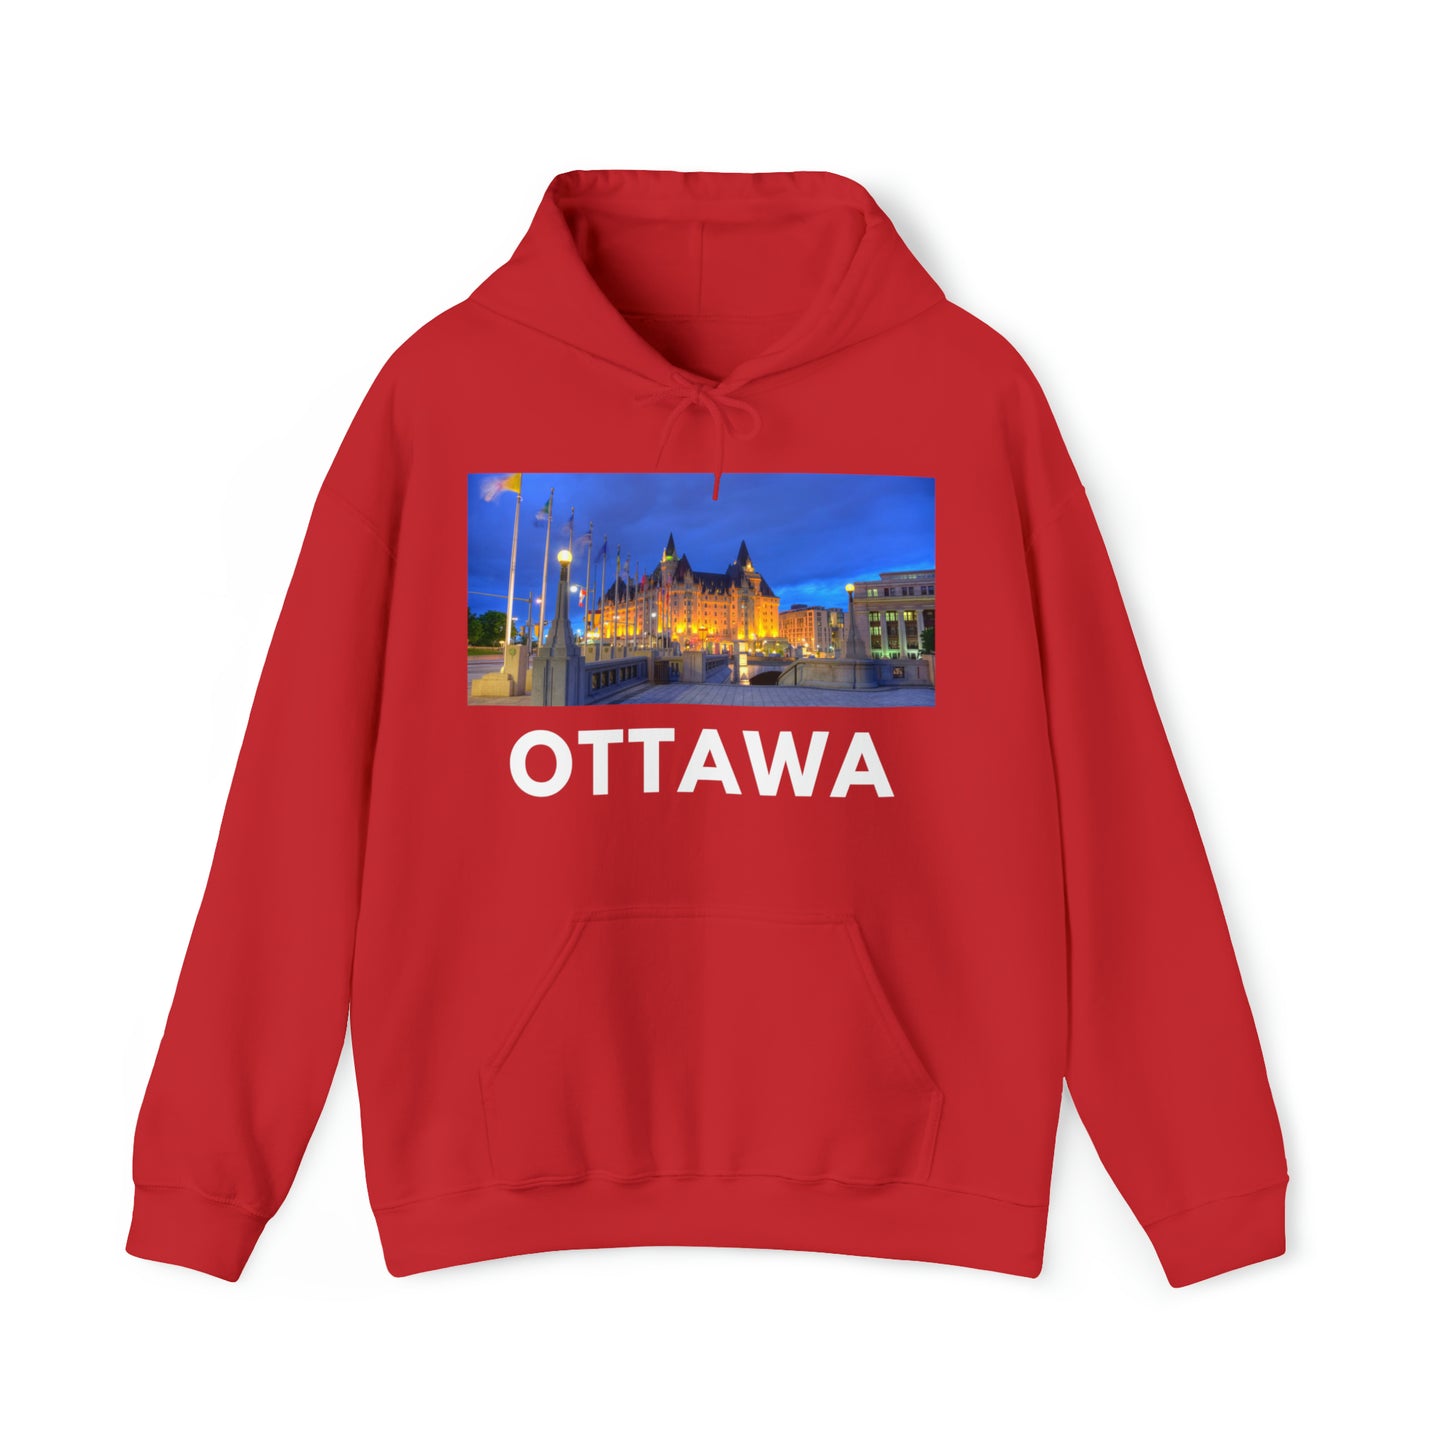 S Red Ottawa Hoodie: Get Political from HoodySZN.com